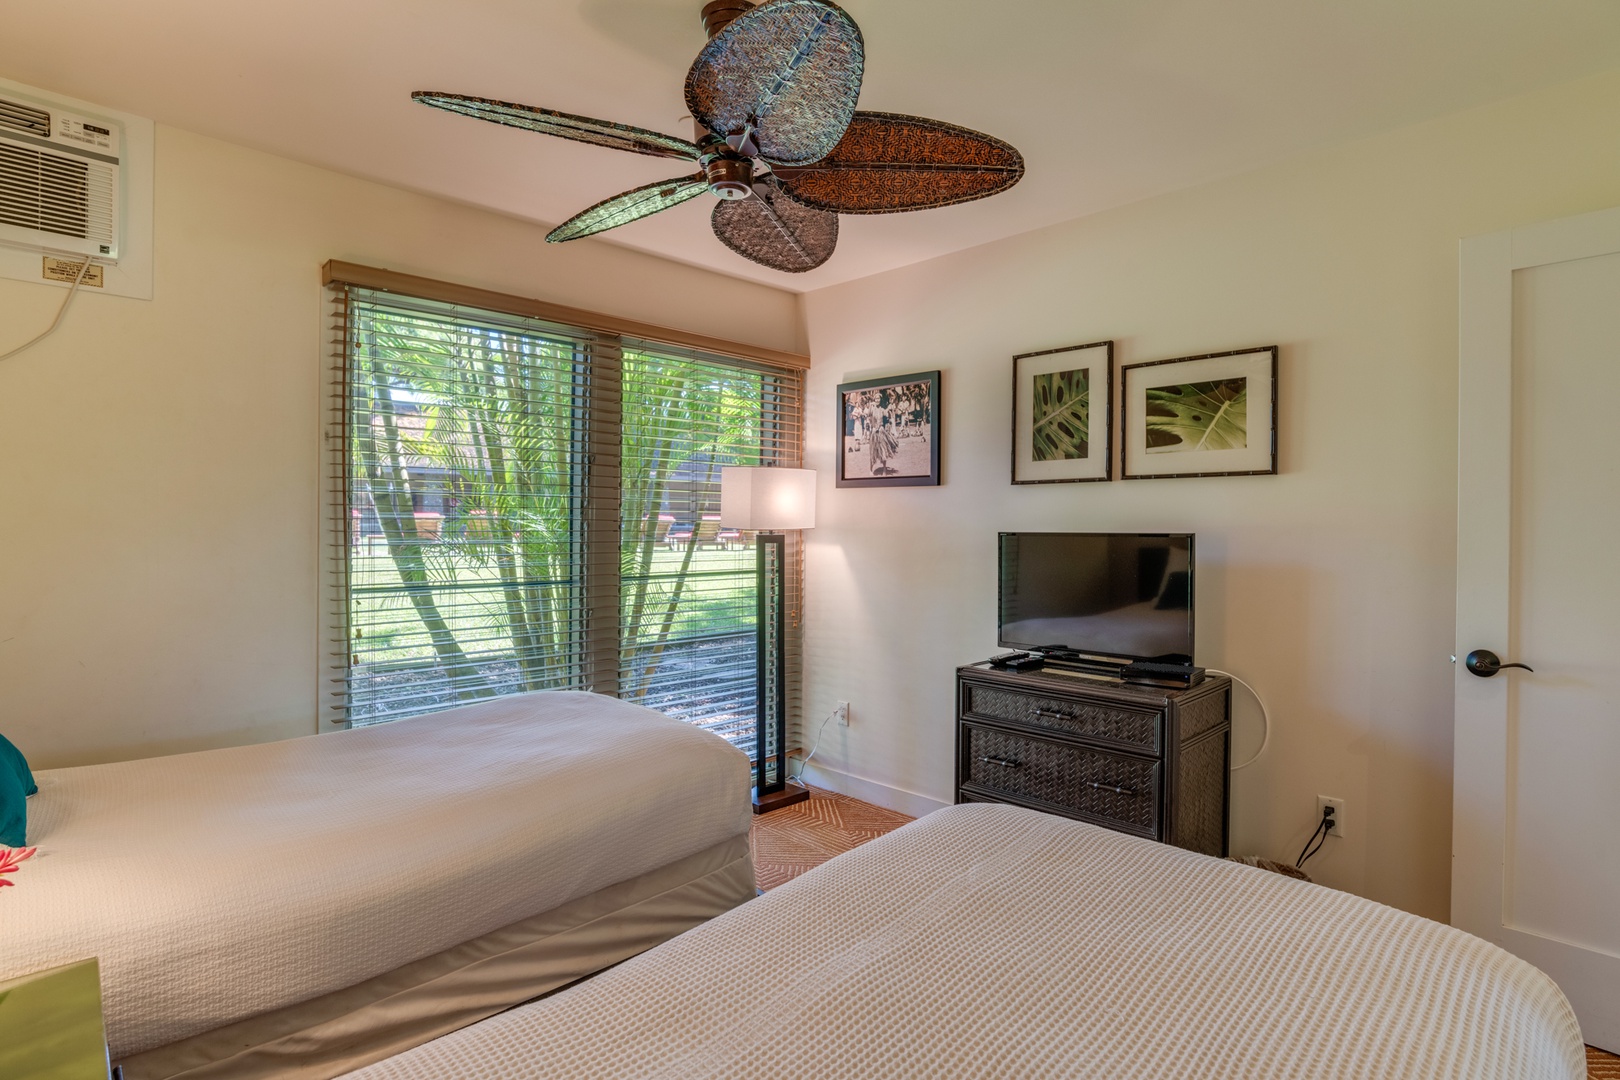 Lahaina Vacation Rentals, Aina Nalu D103 - This bedroom is also equipped with a flat screen TV, ceiling fan, and window A/C to keep you cool and comfortable